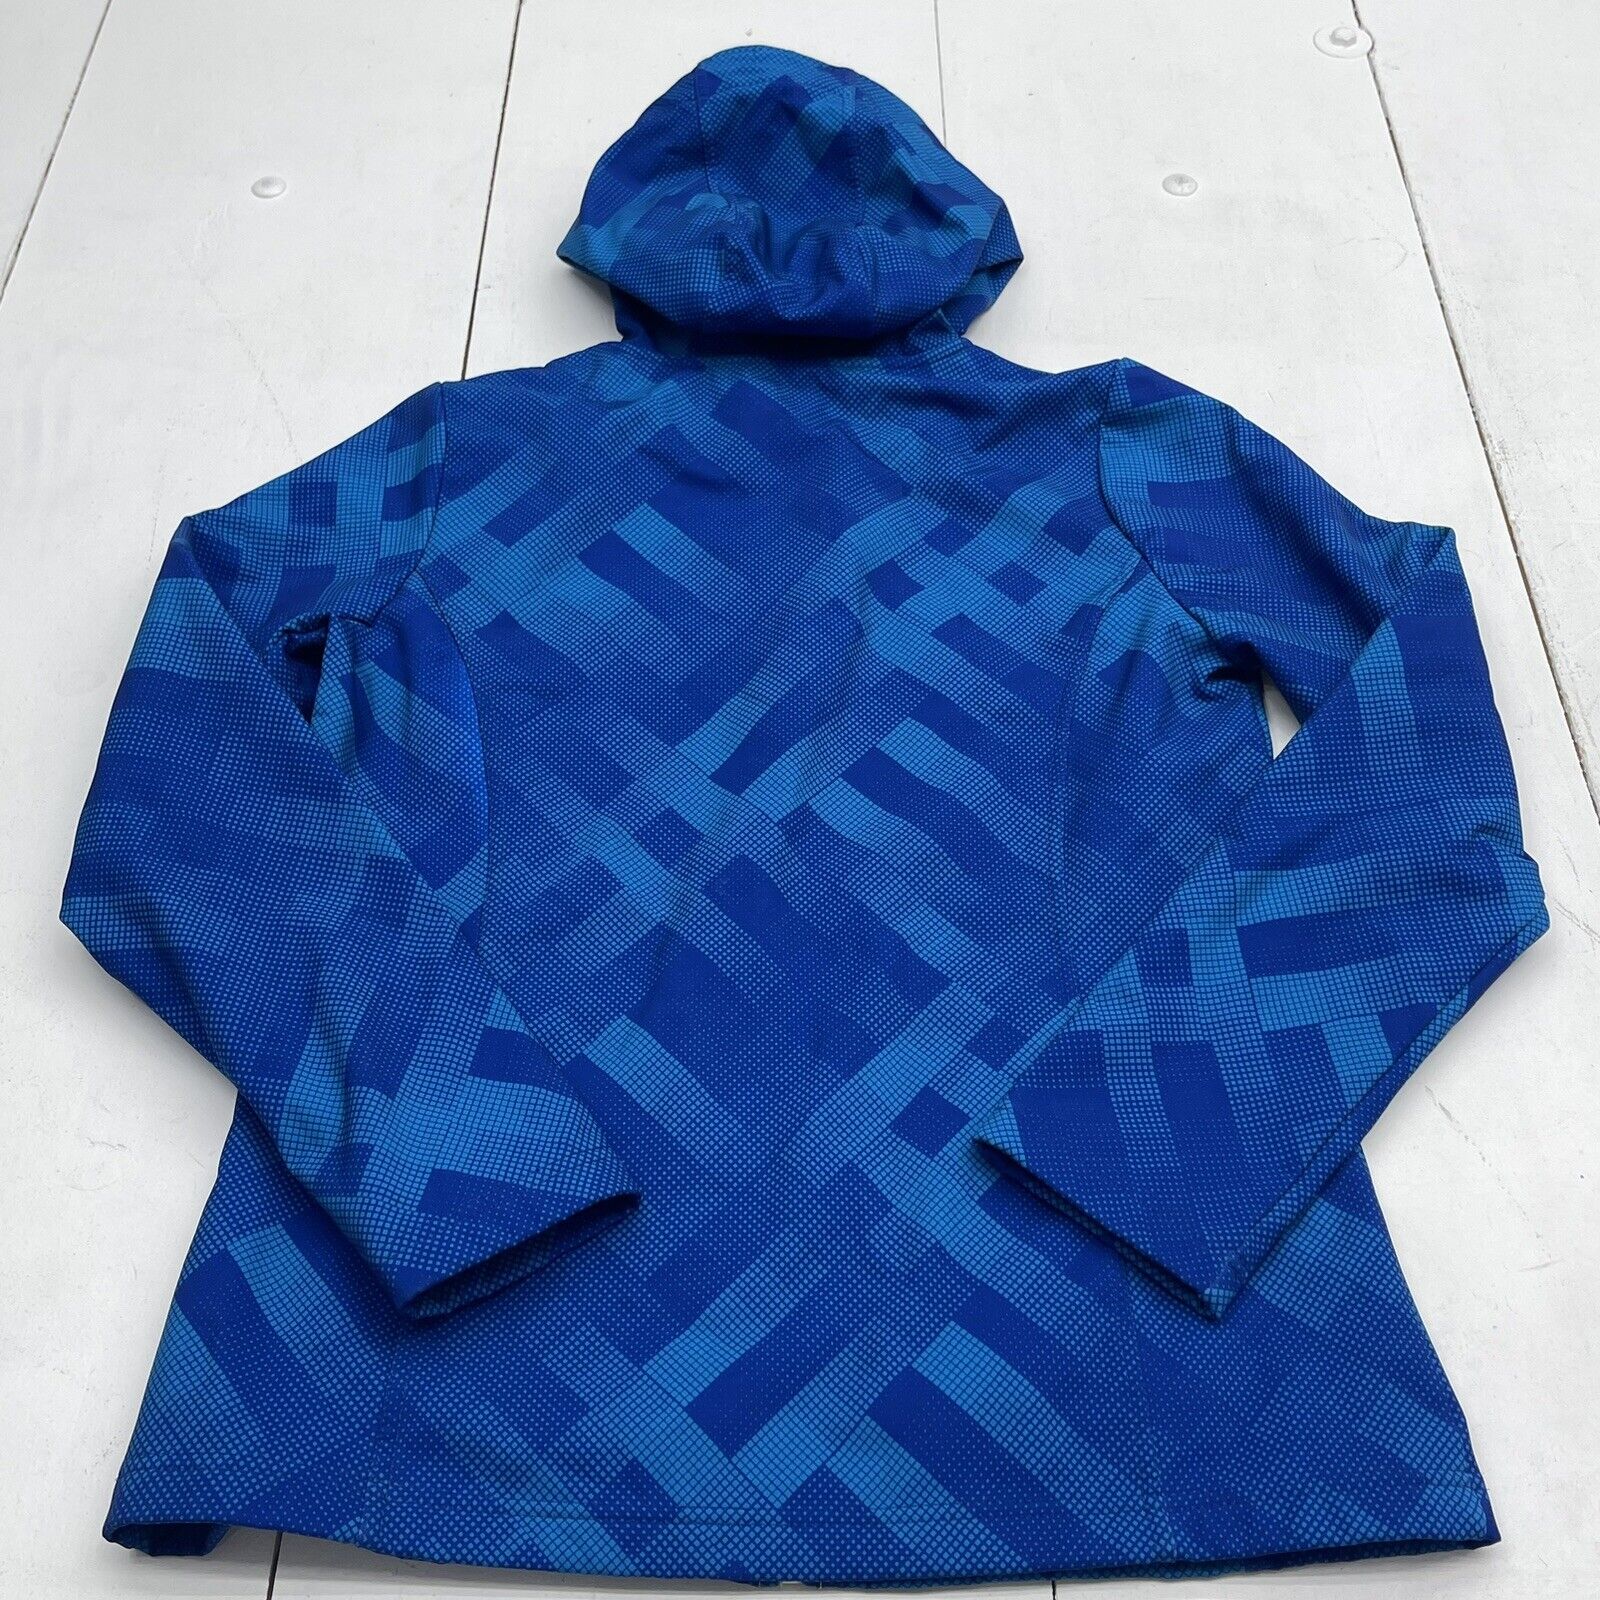 Xersion Performance Blue Printed Hooded Zip Up Coat Women's Size